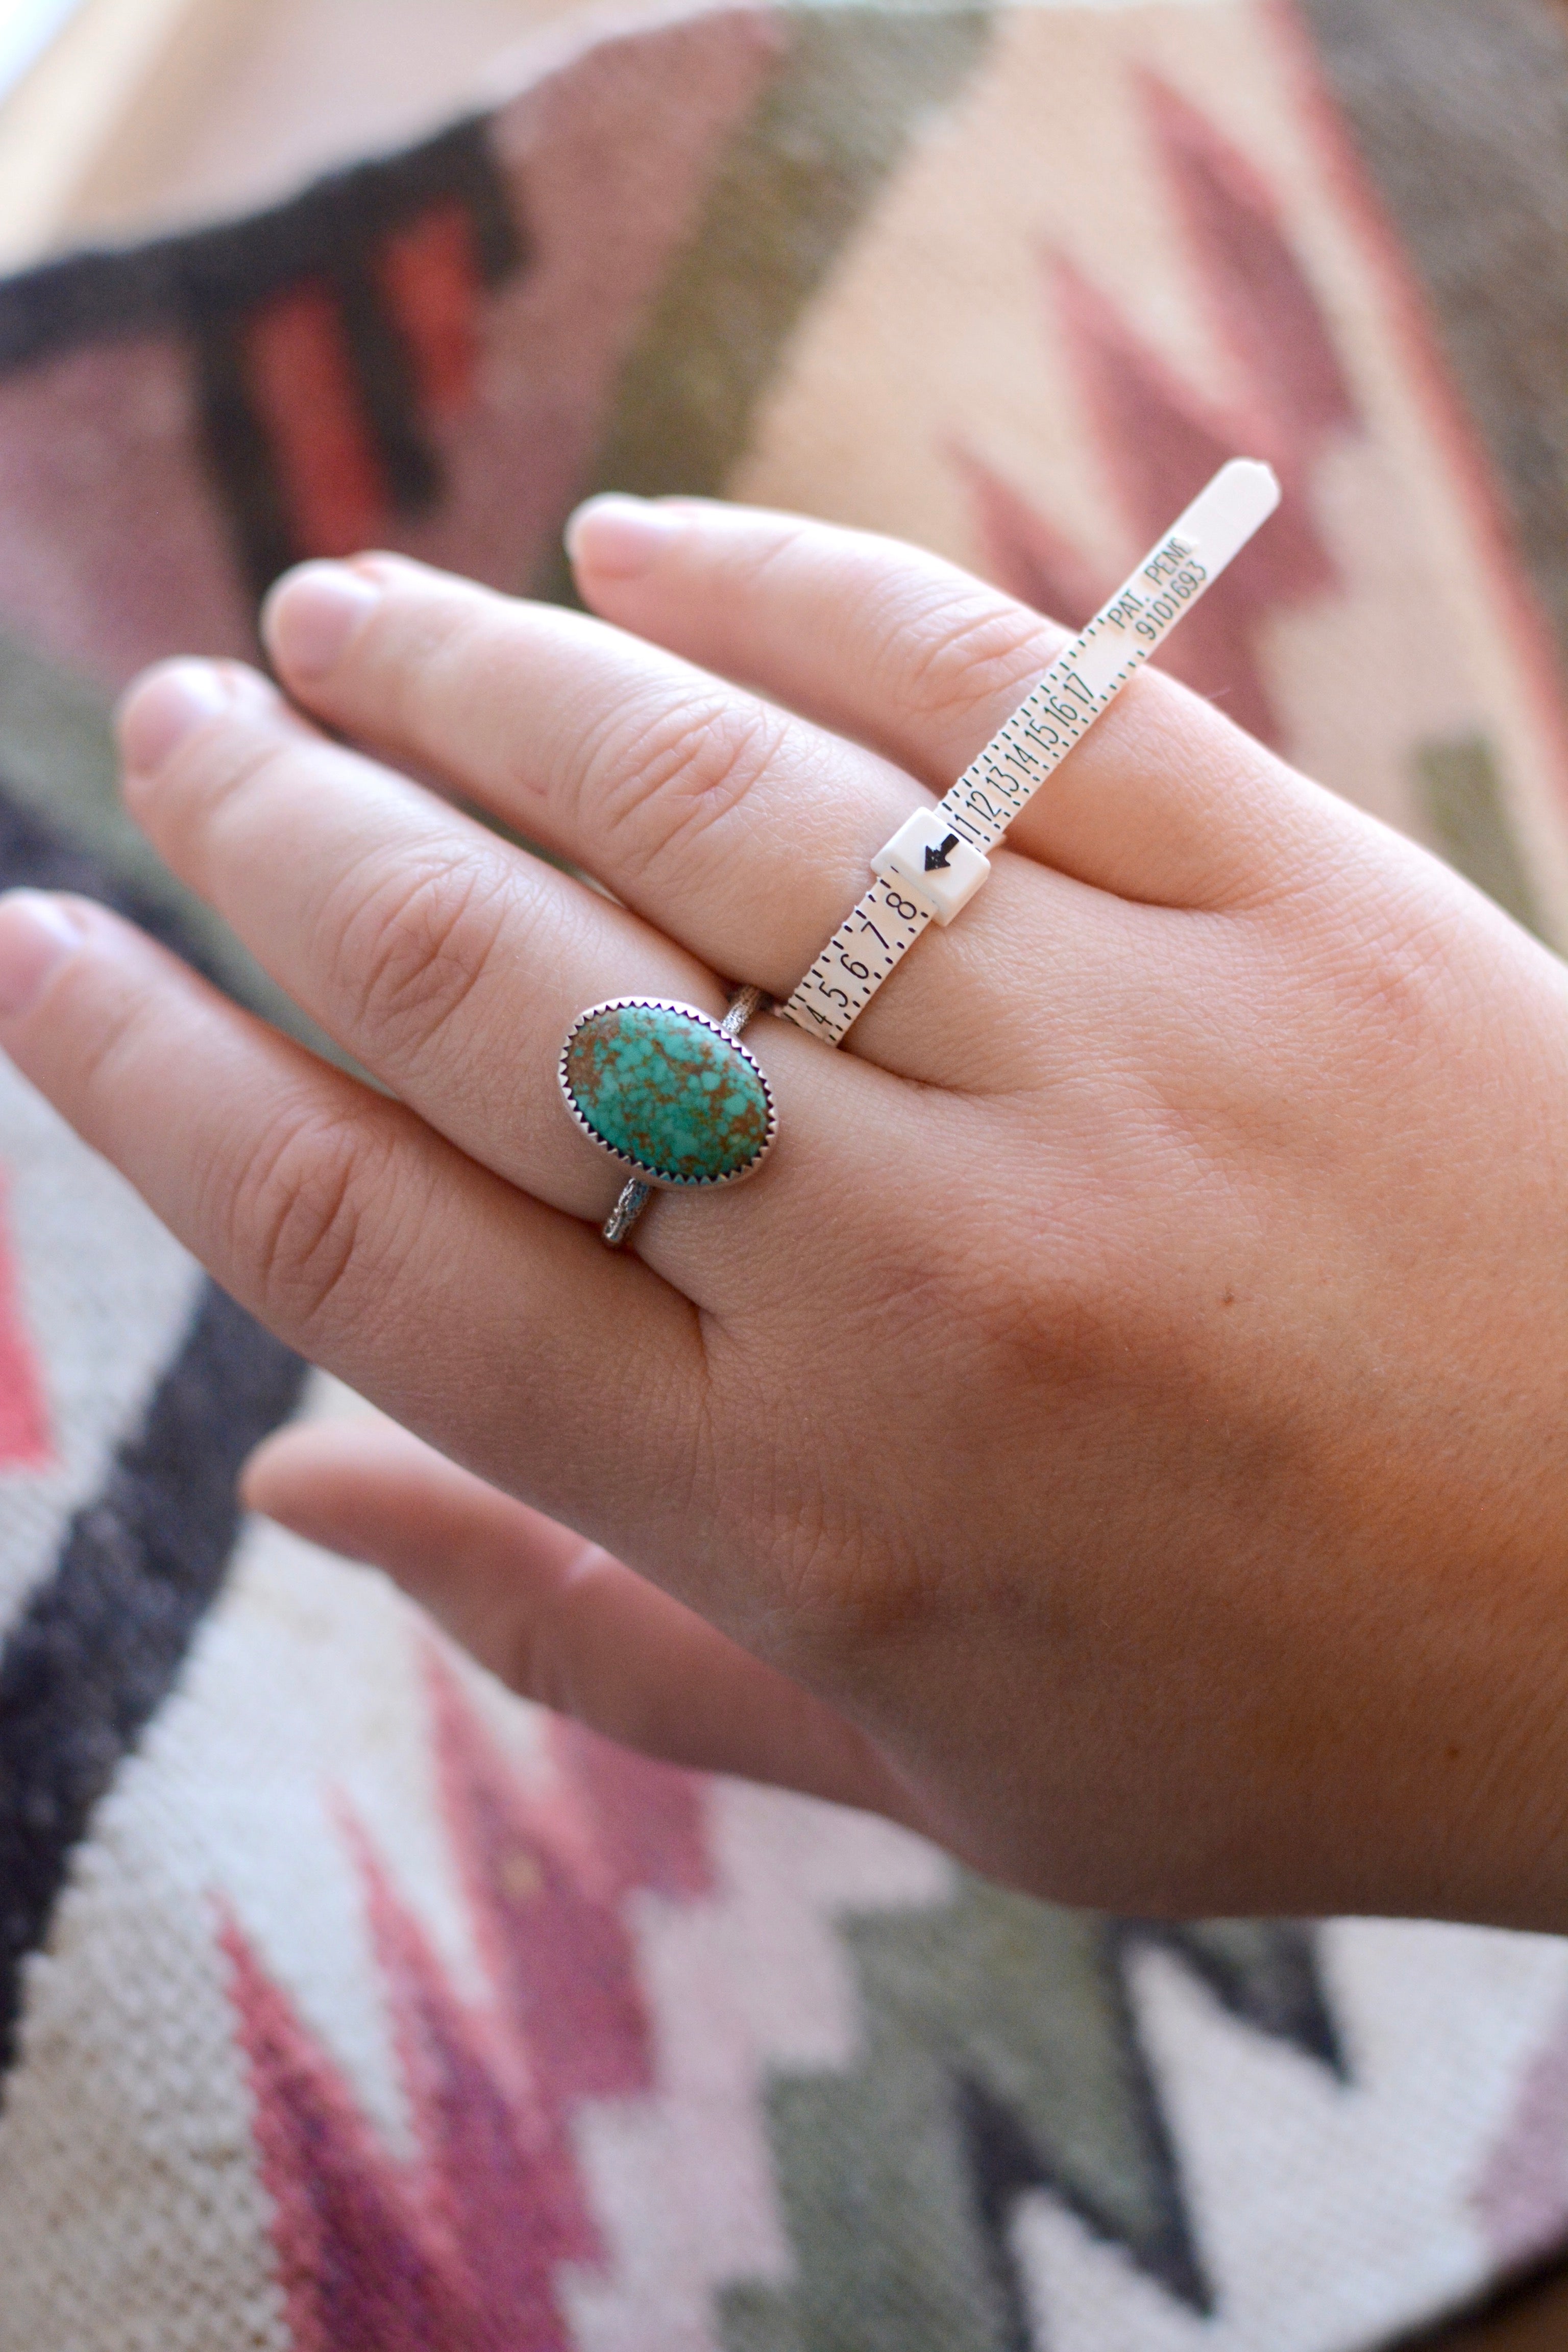 Find Your Ring Size // Ring Multi-Sizer